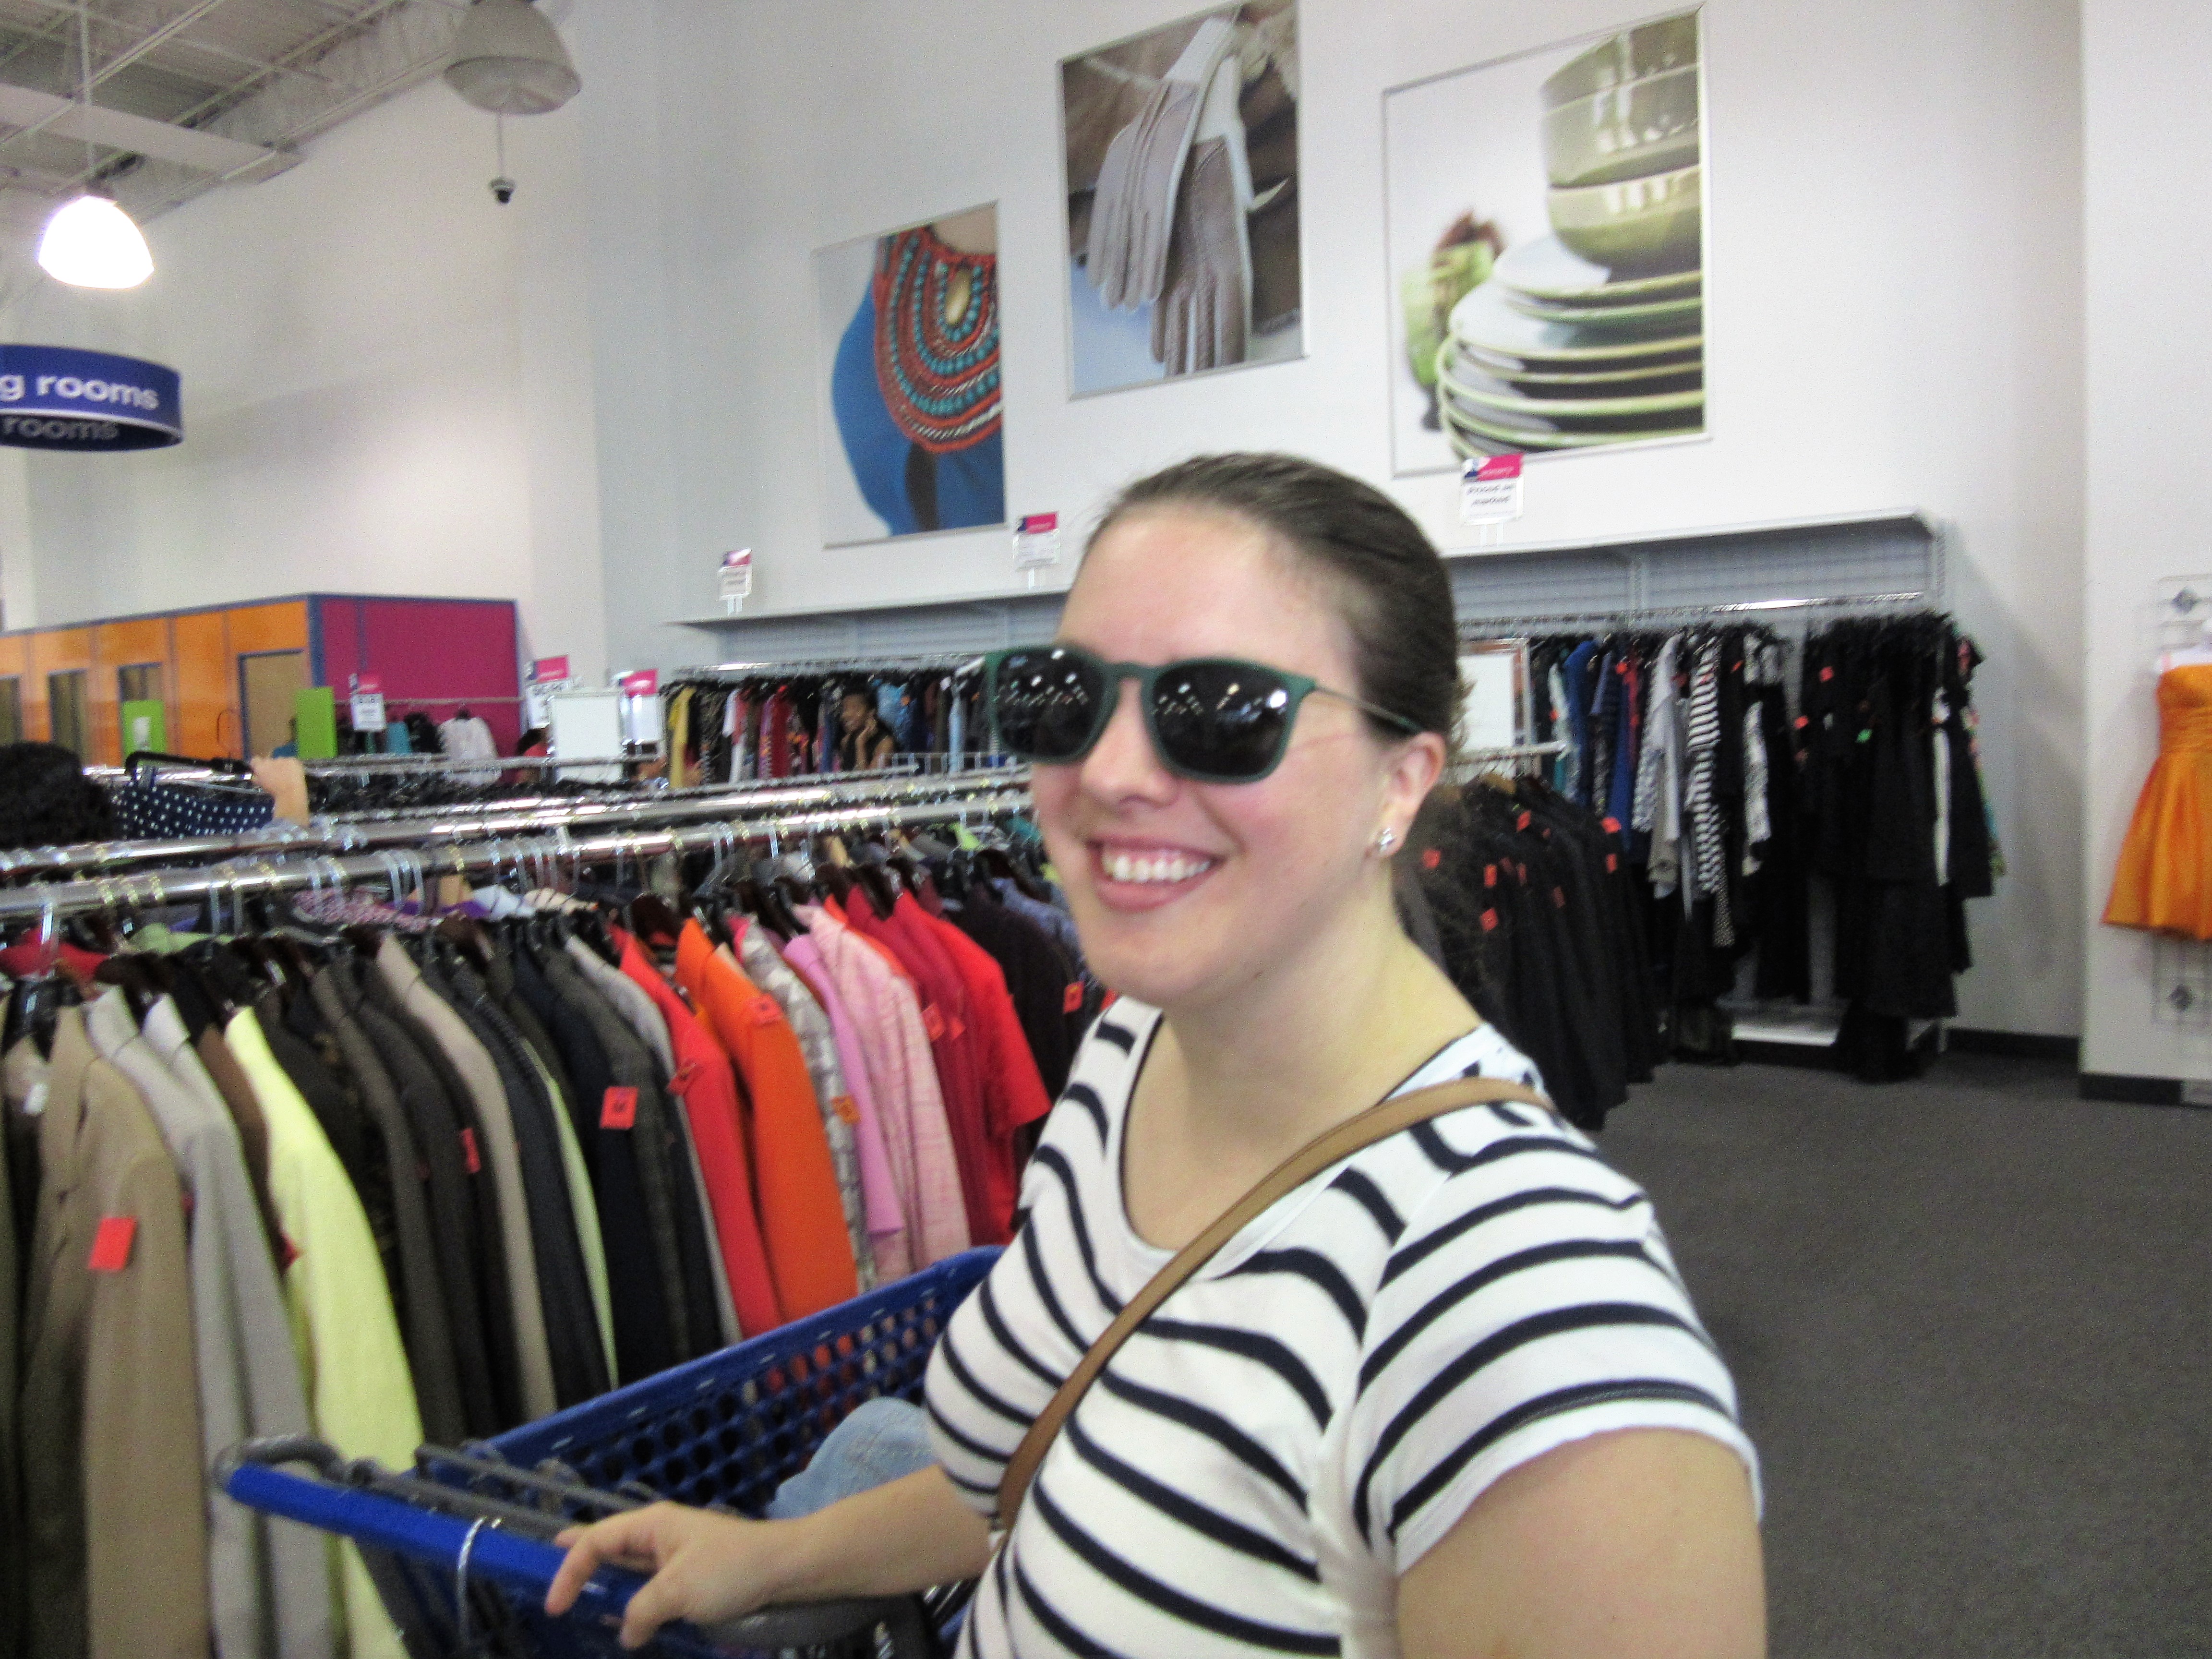 meetup shopper wearing Ray Ban sunglasses found at Bowie, MD Goodwill